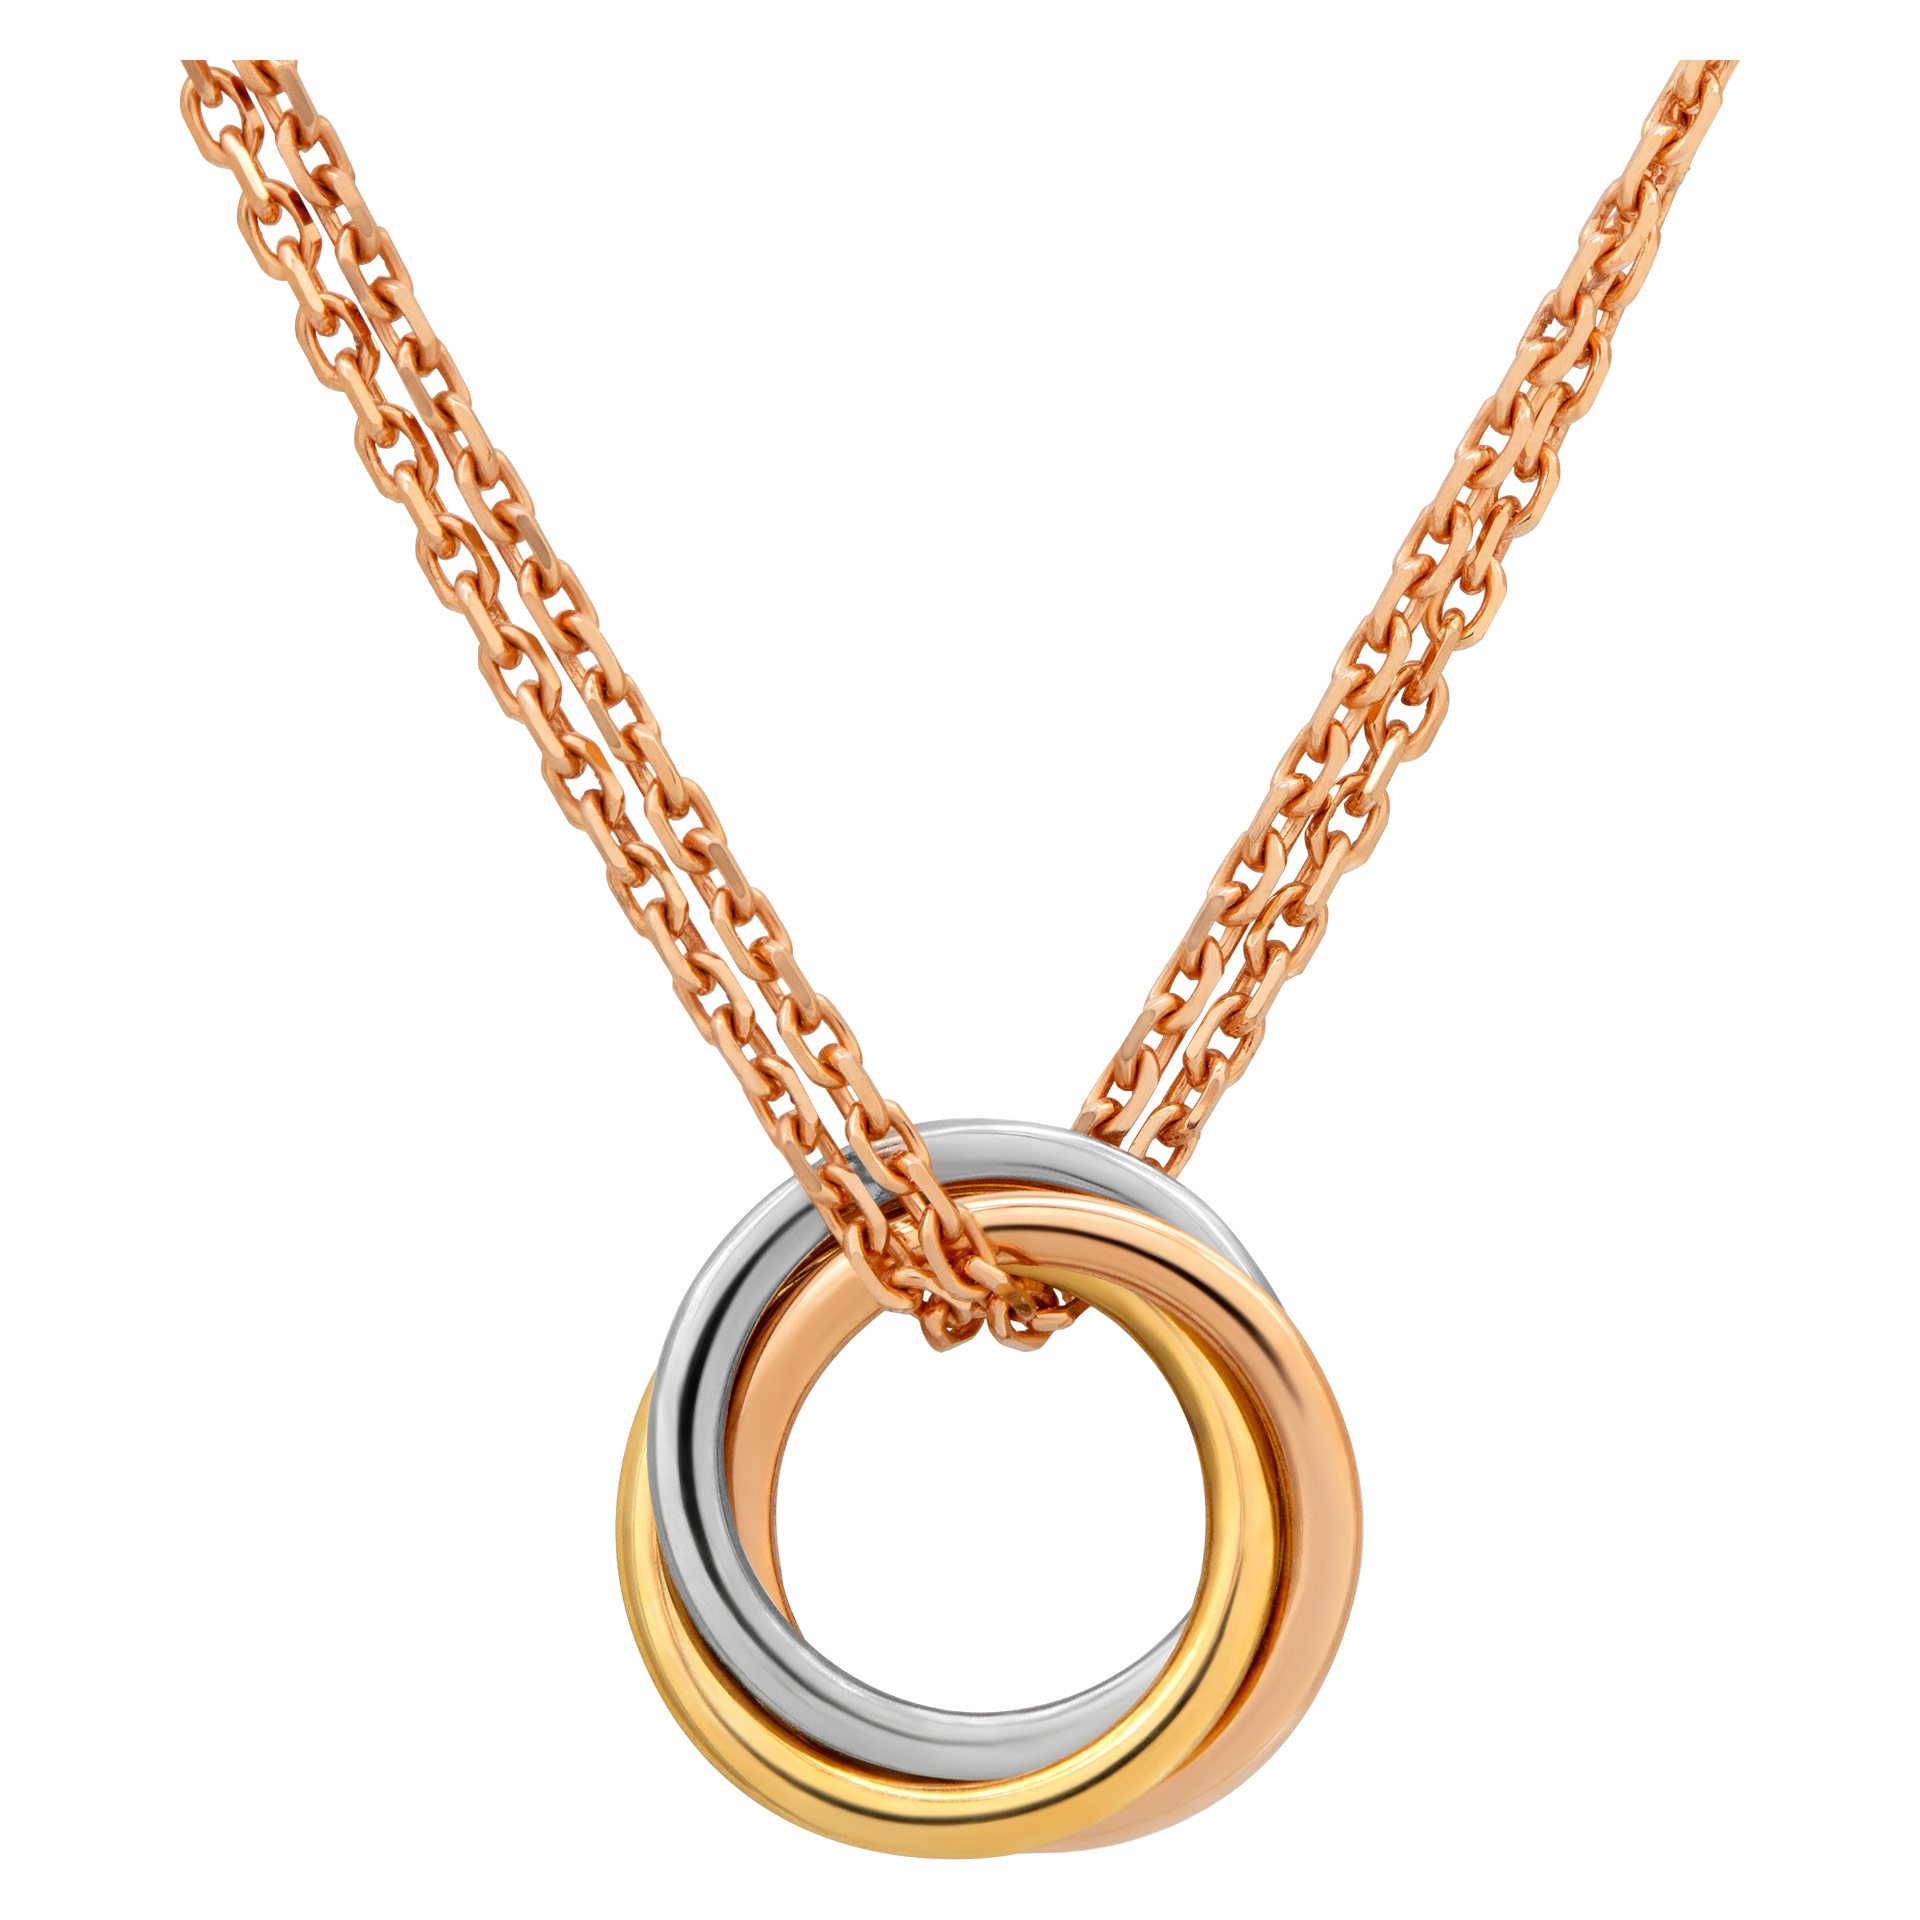 Cartier Trinity necklace in 18k white, yellow, and pink gold